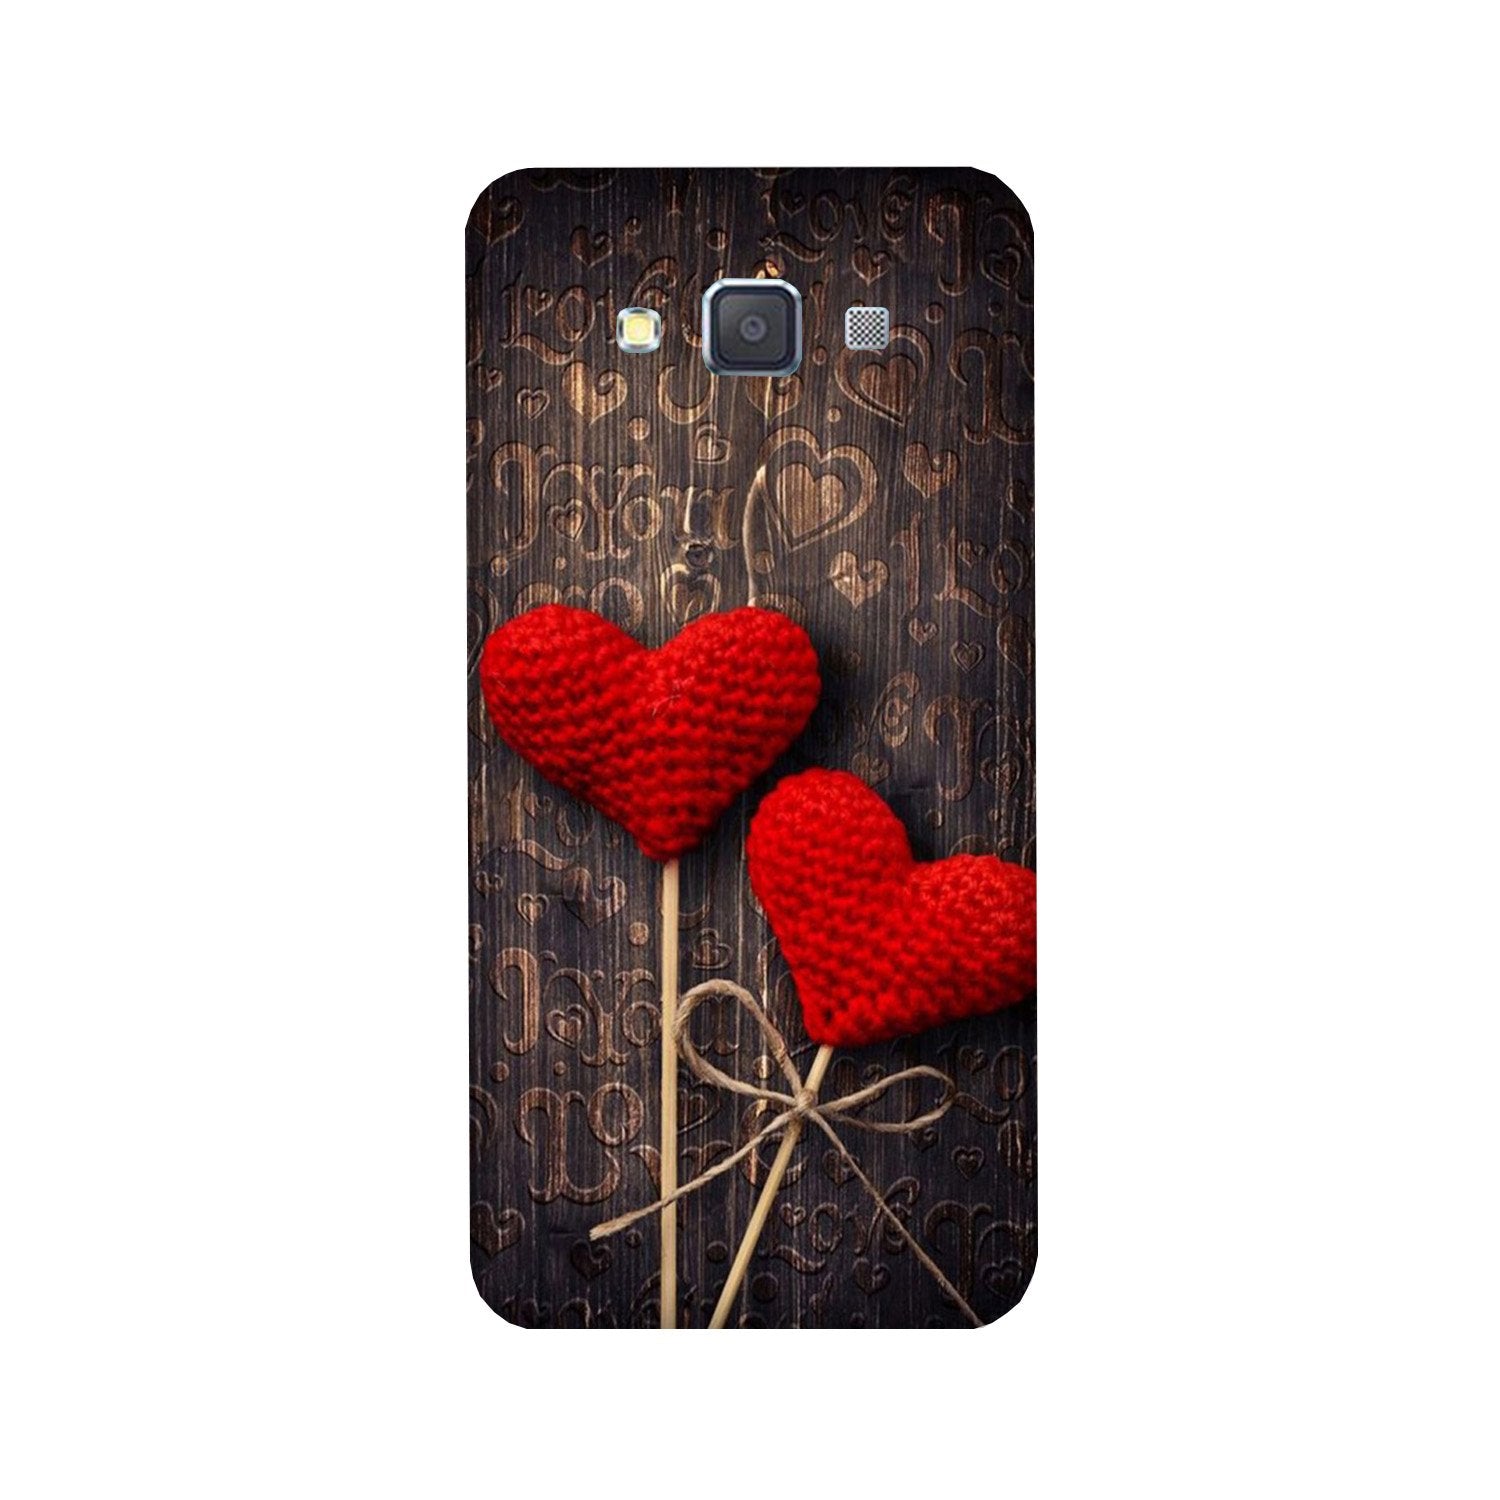 Red Hearts Case for Galaxy J5 (2016)